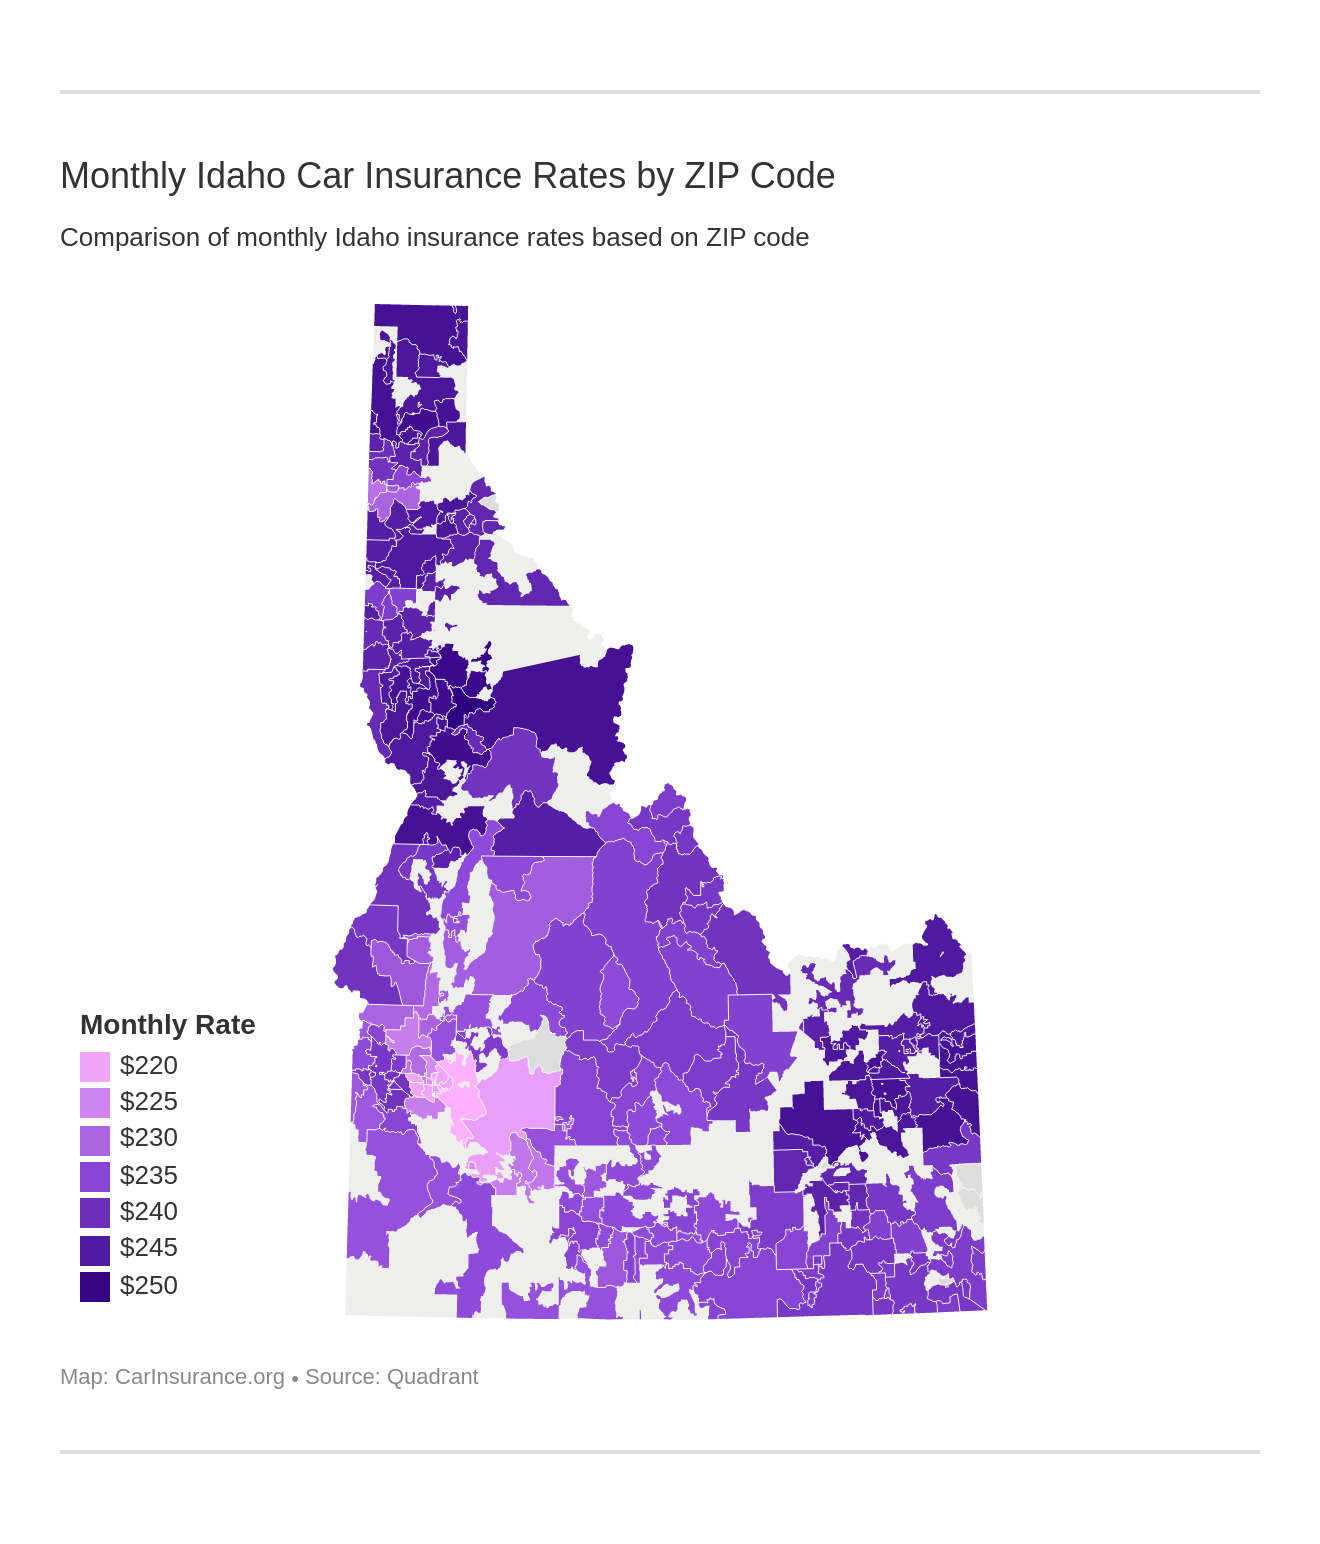 Monthly Idaho Car Insurance Rates by ZIP Code